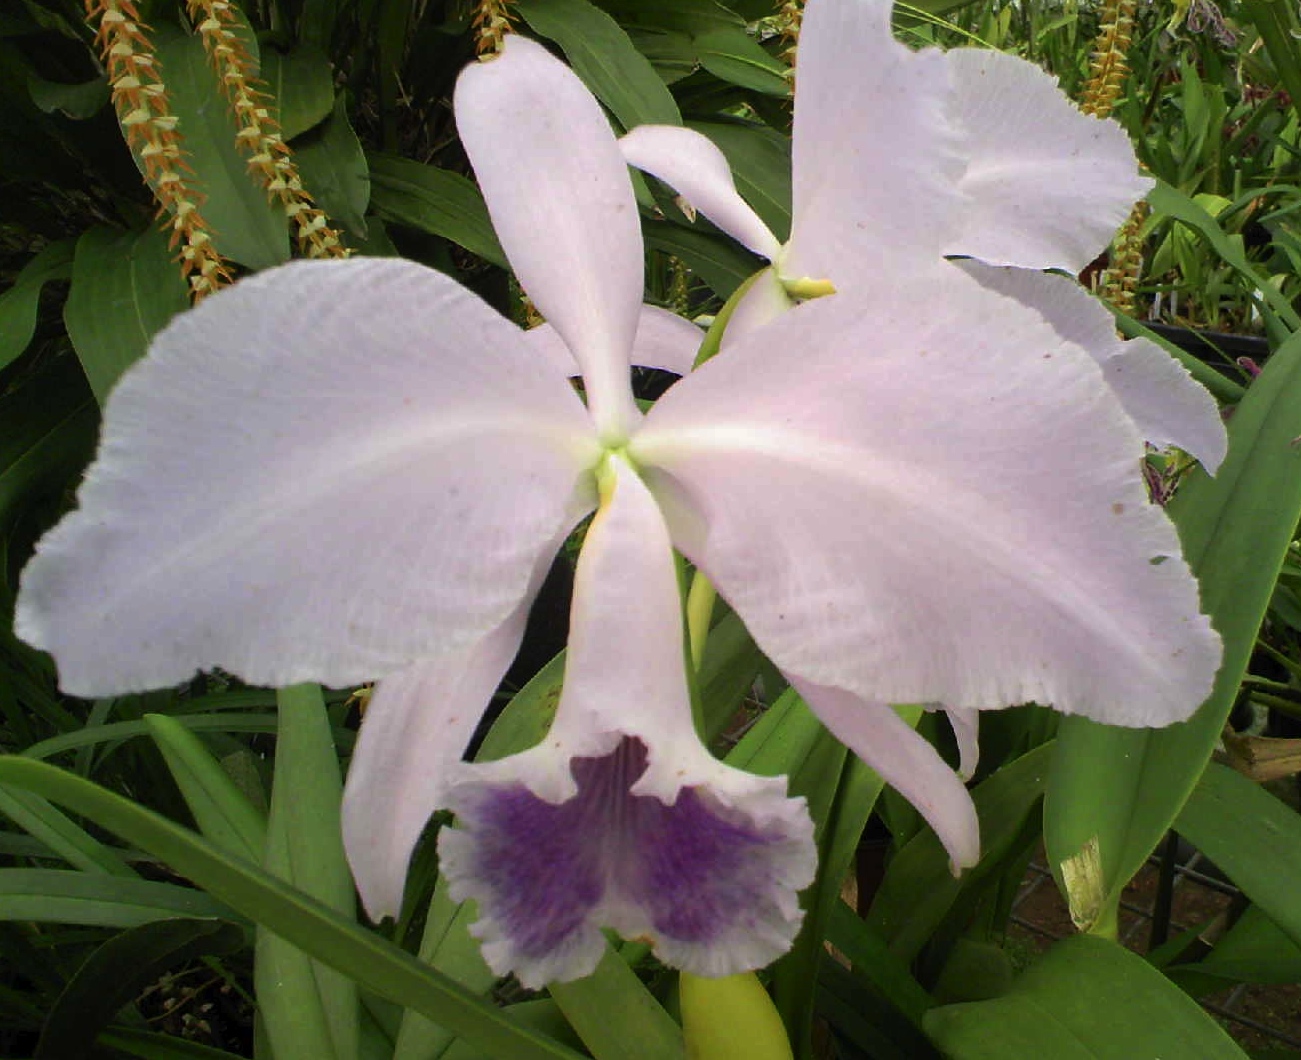 types of flowers grown in greenhouses Show Pictures of Cattleya Orchids | 1301 x 1060